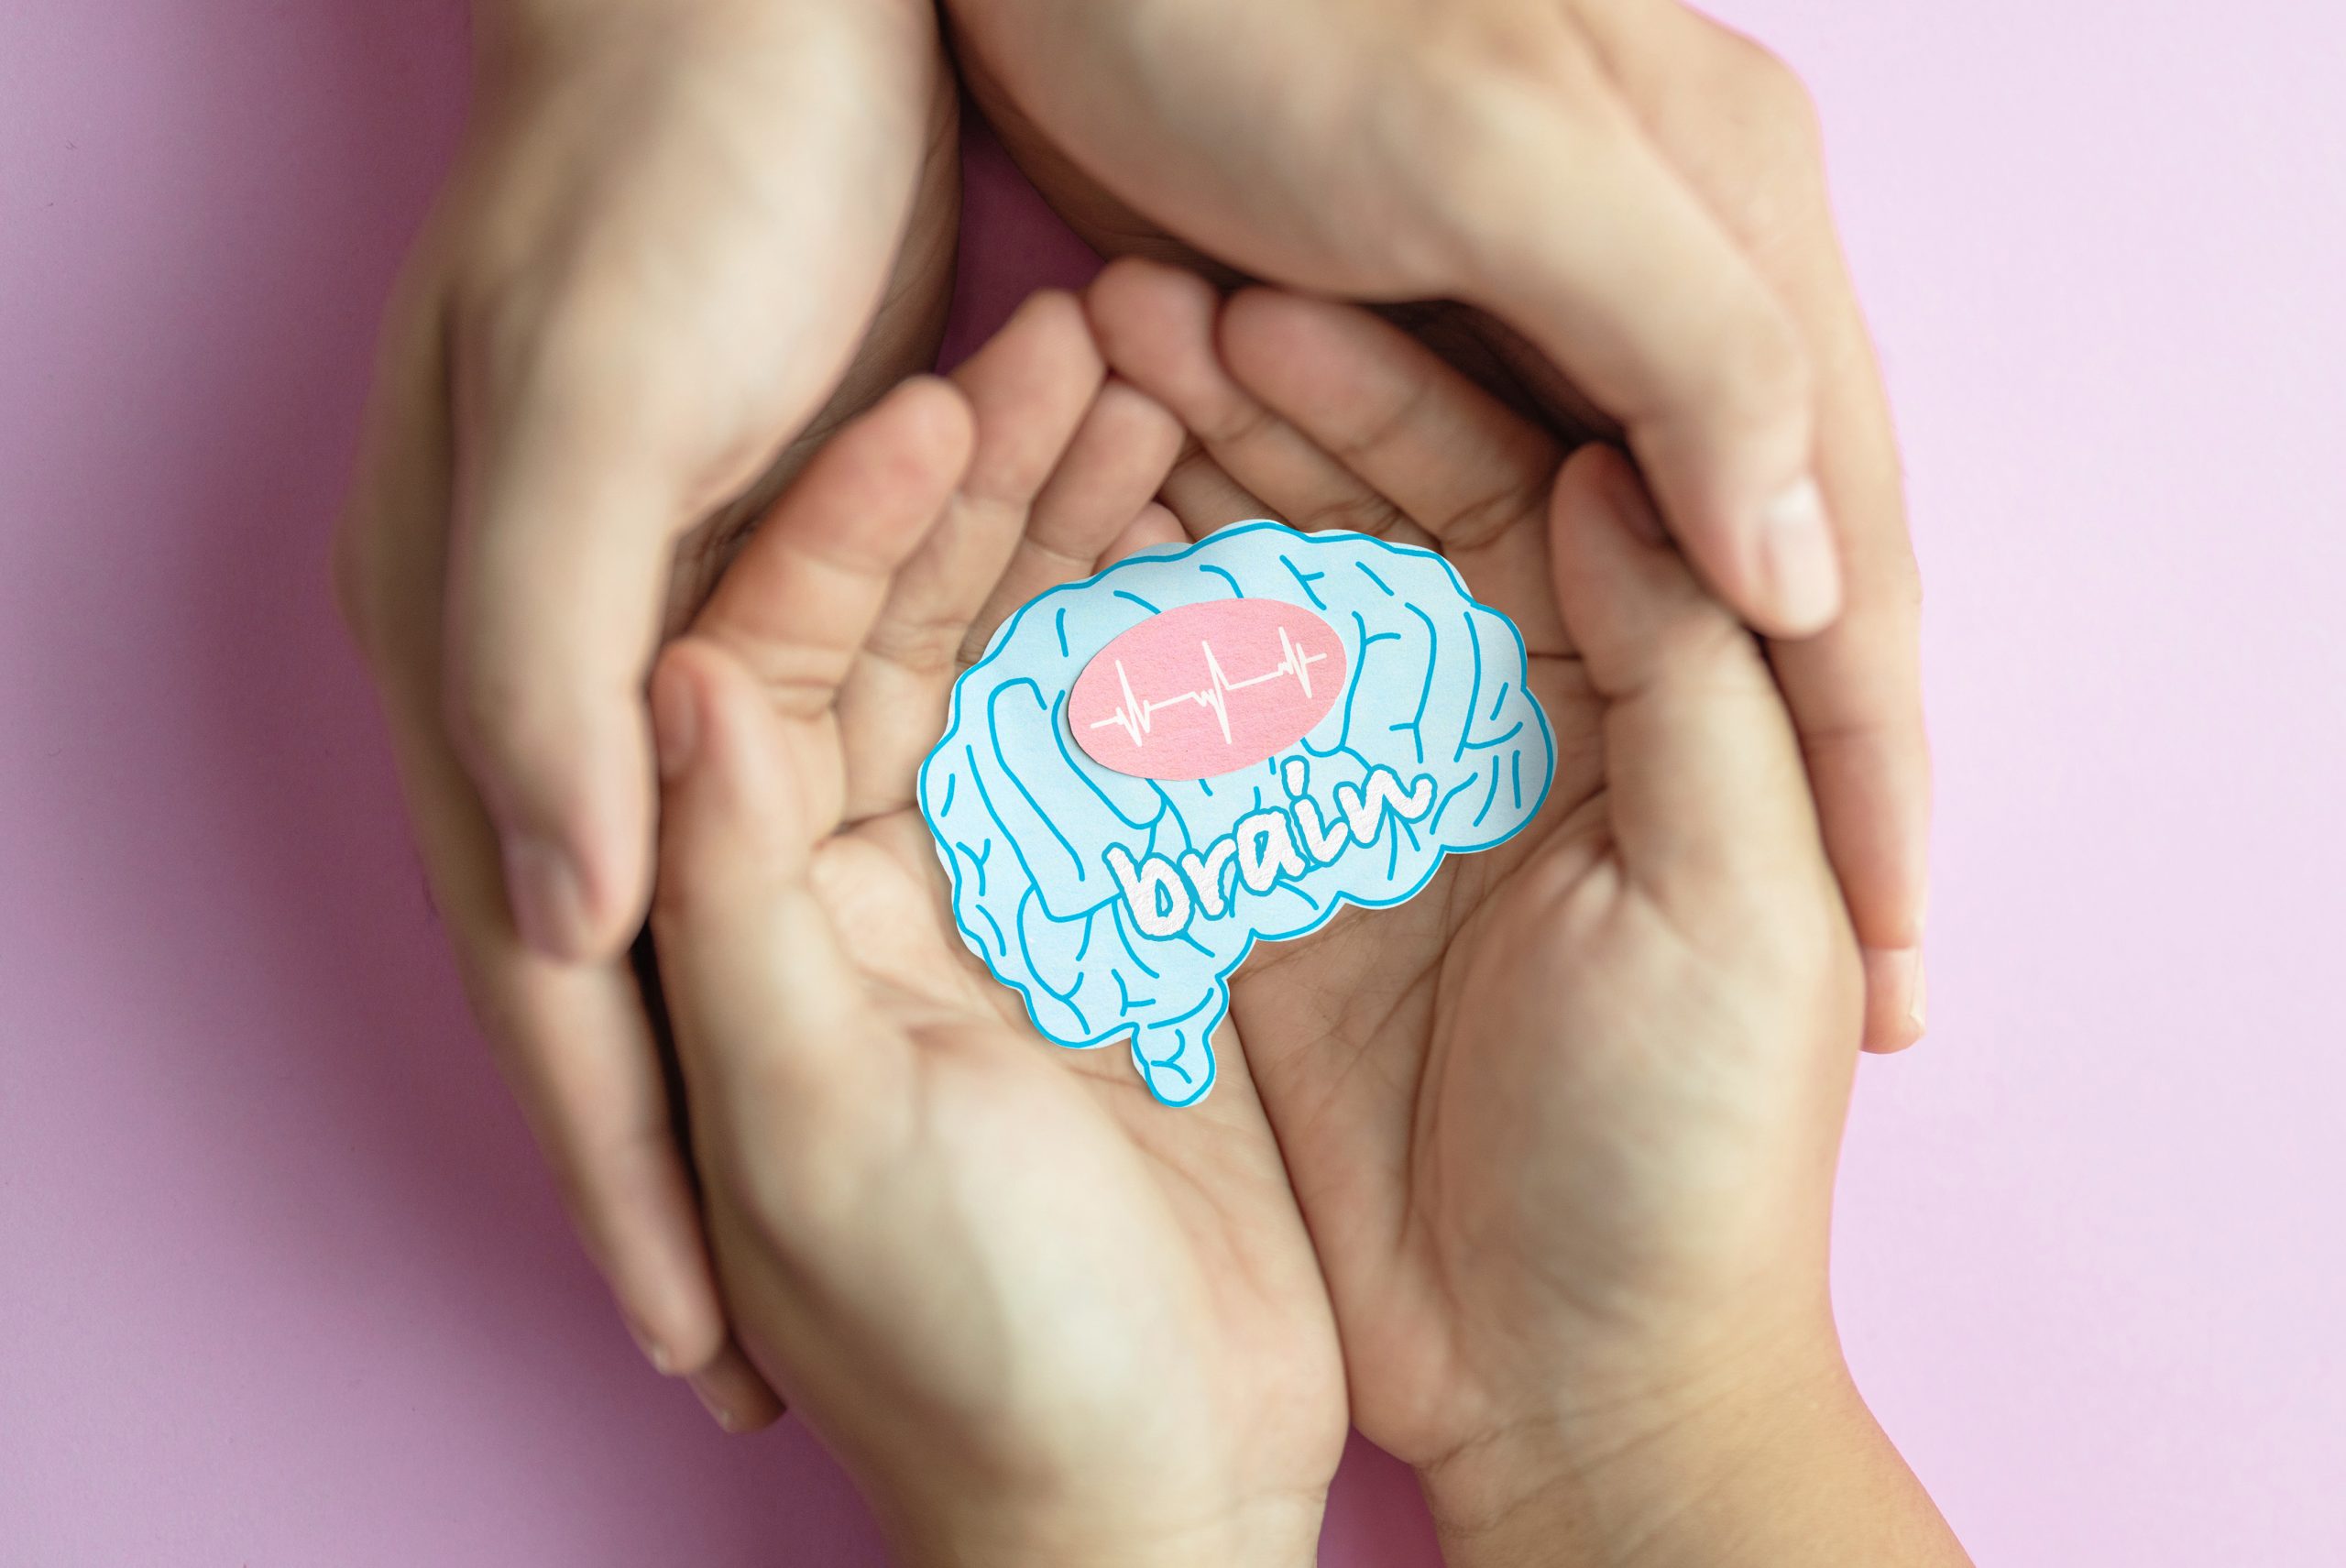 hands holding a paper cutout of a human brain labeled "brain"